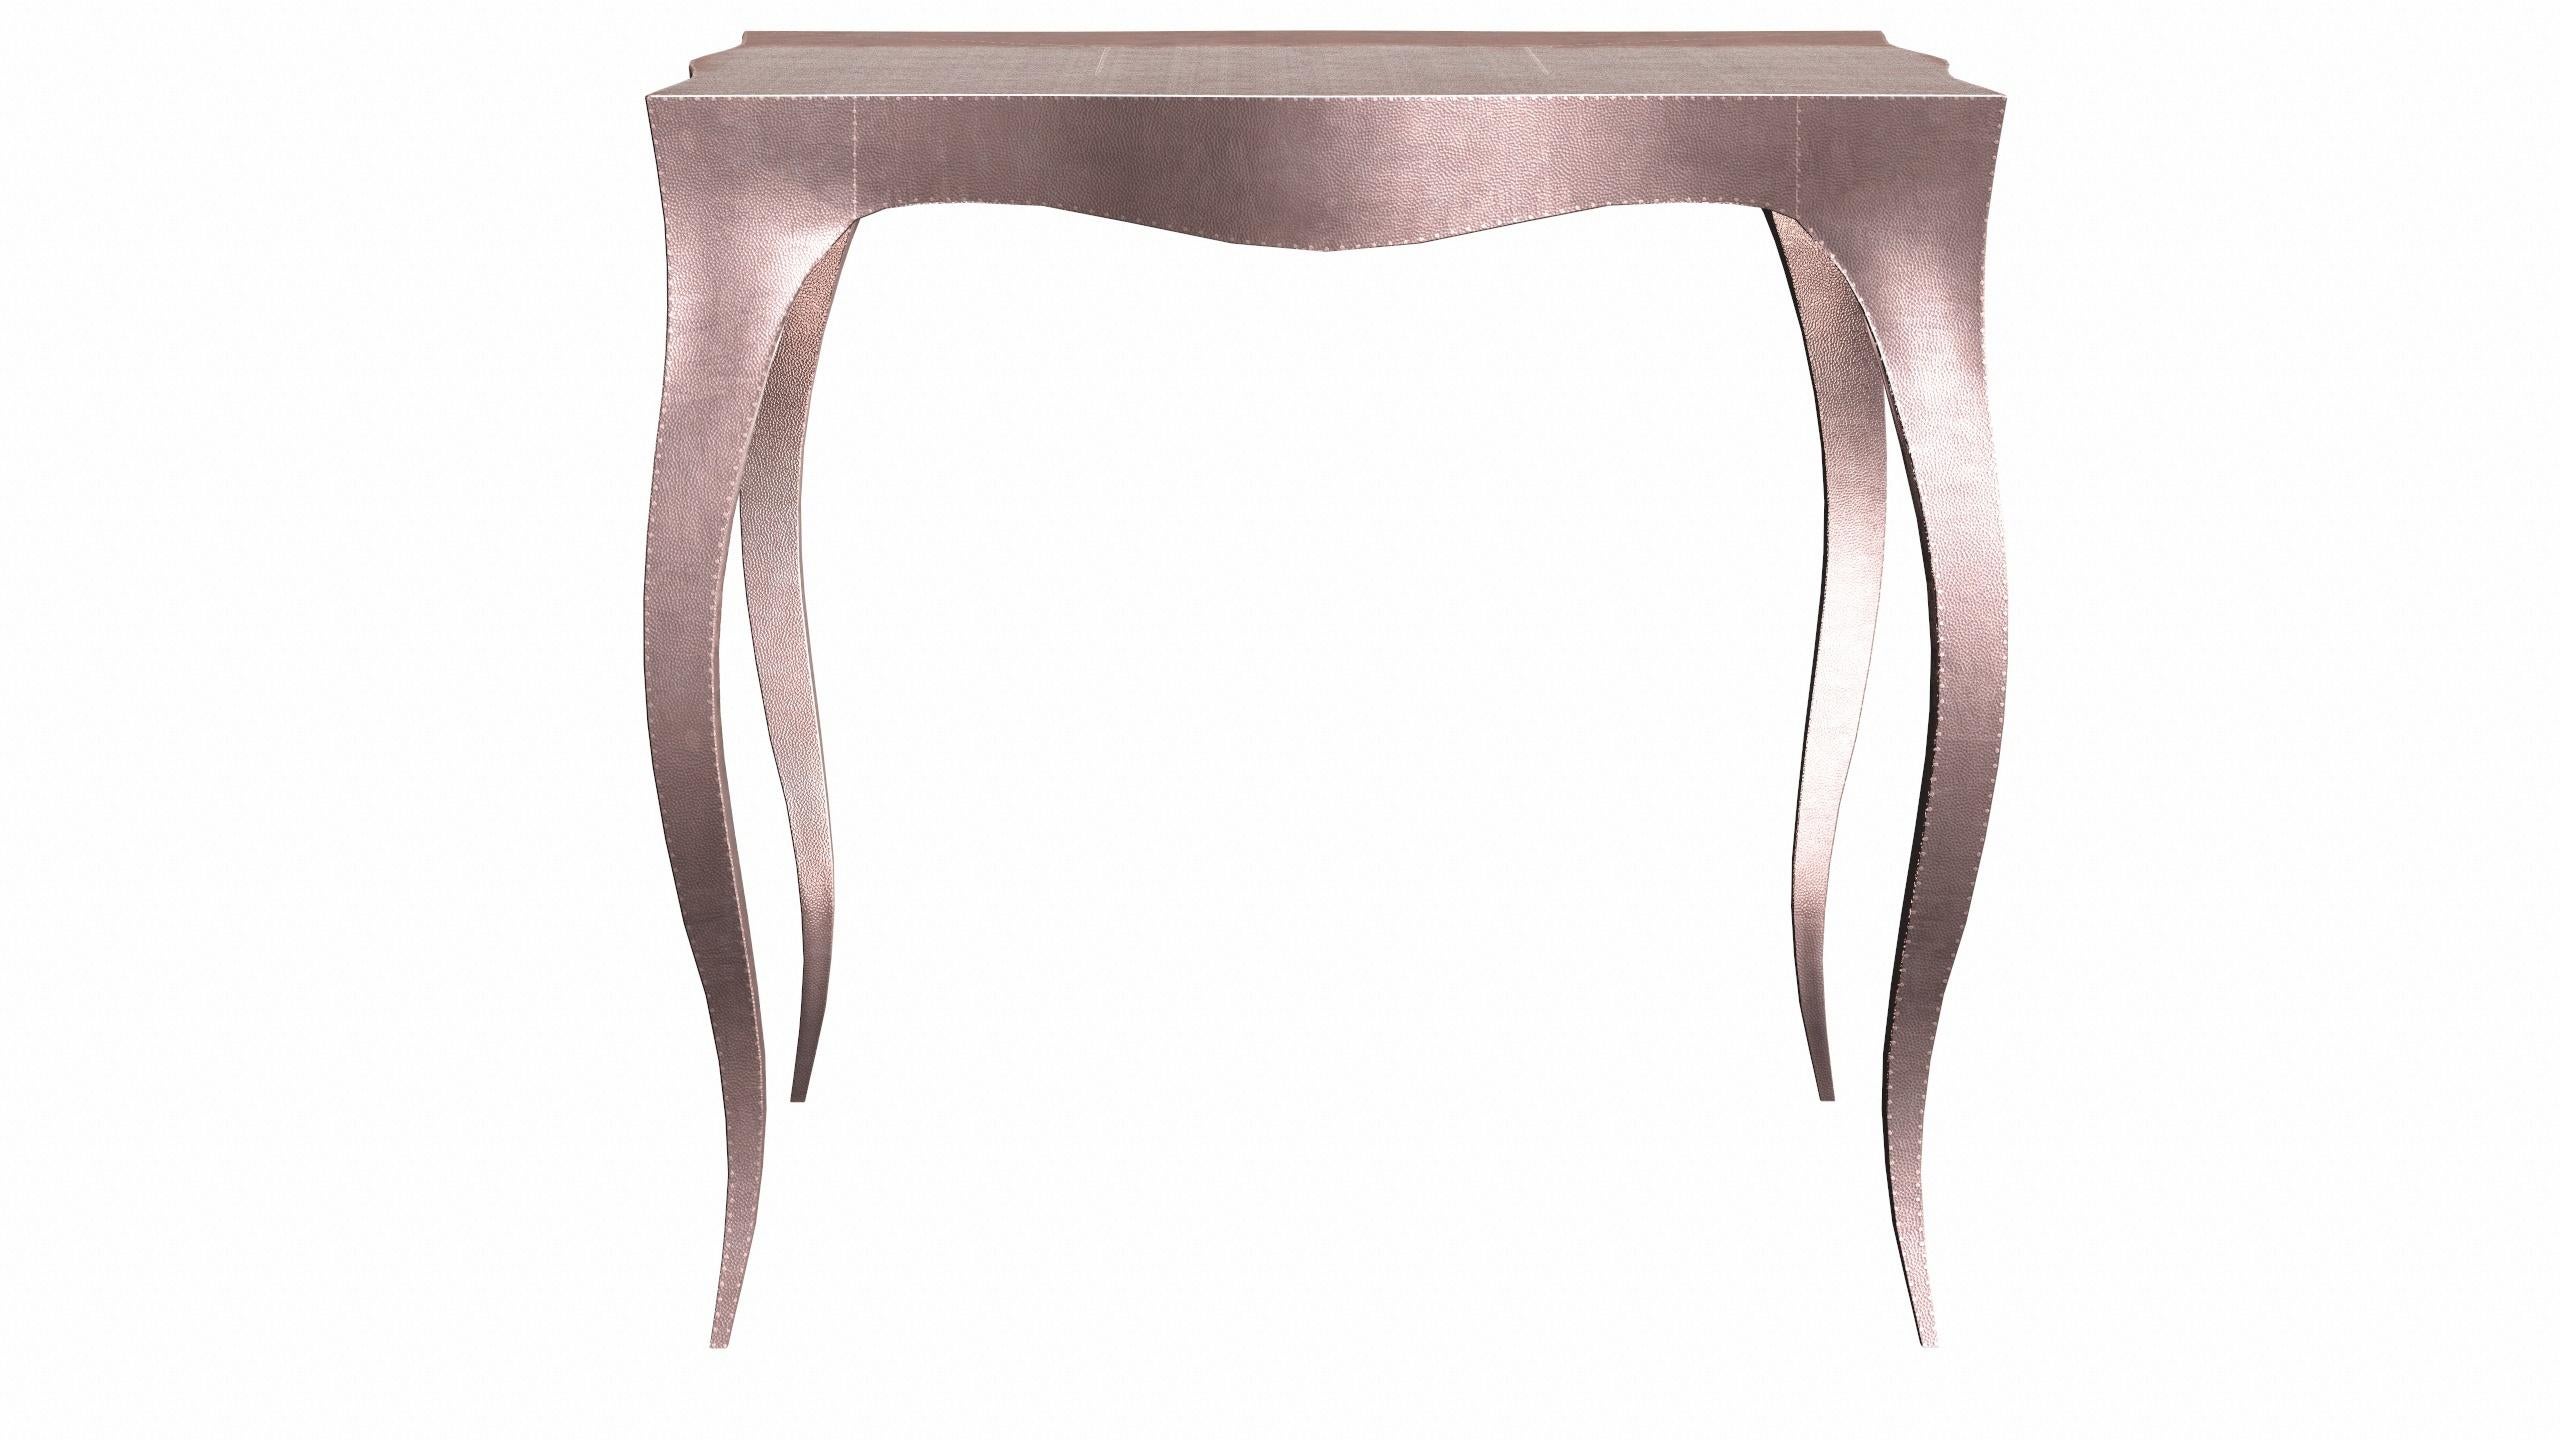 American Louise Art Deco Nesting Tables and Stacking Tables Mid. Hammered Copper  For Sale